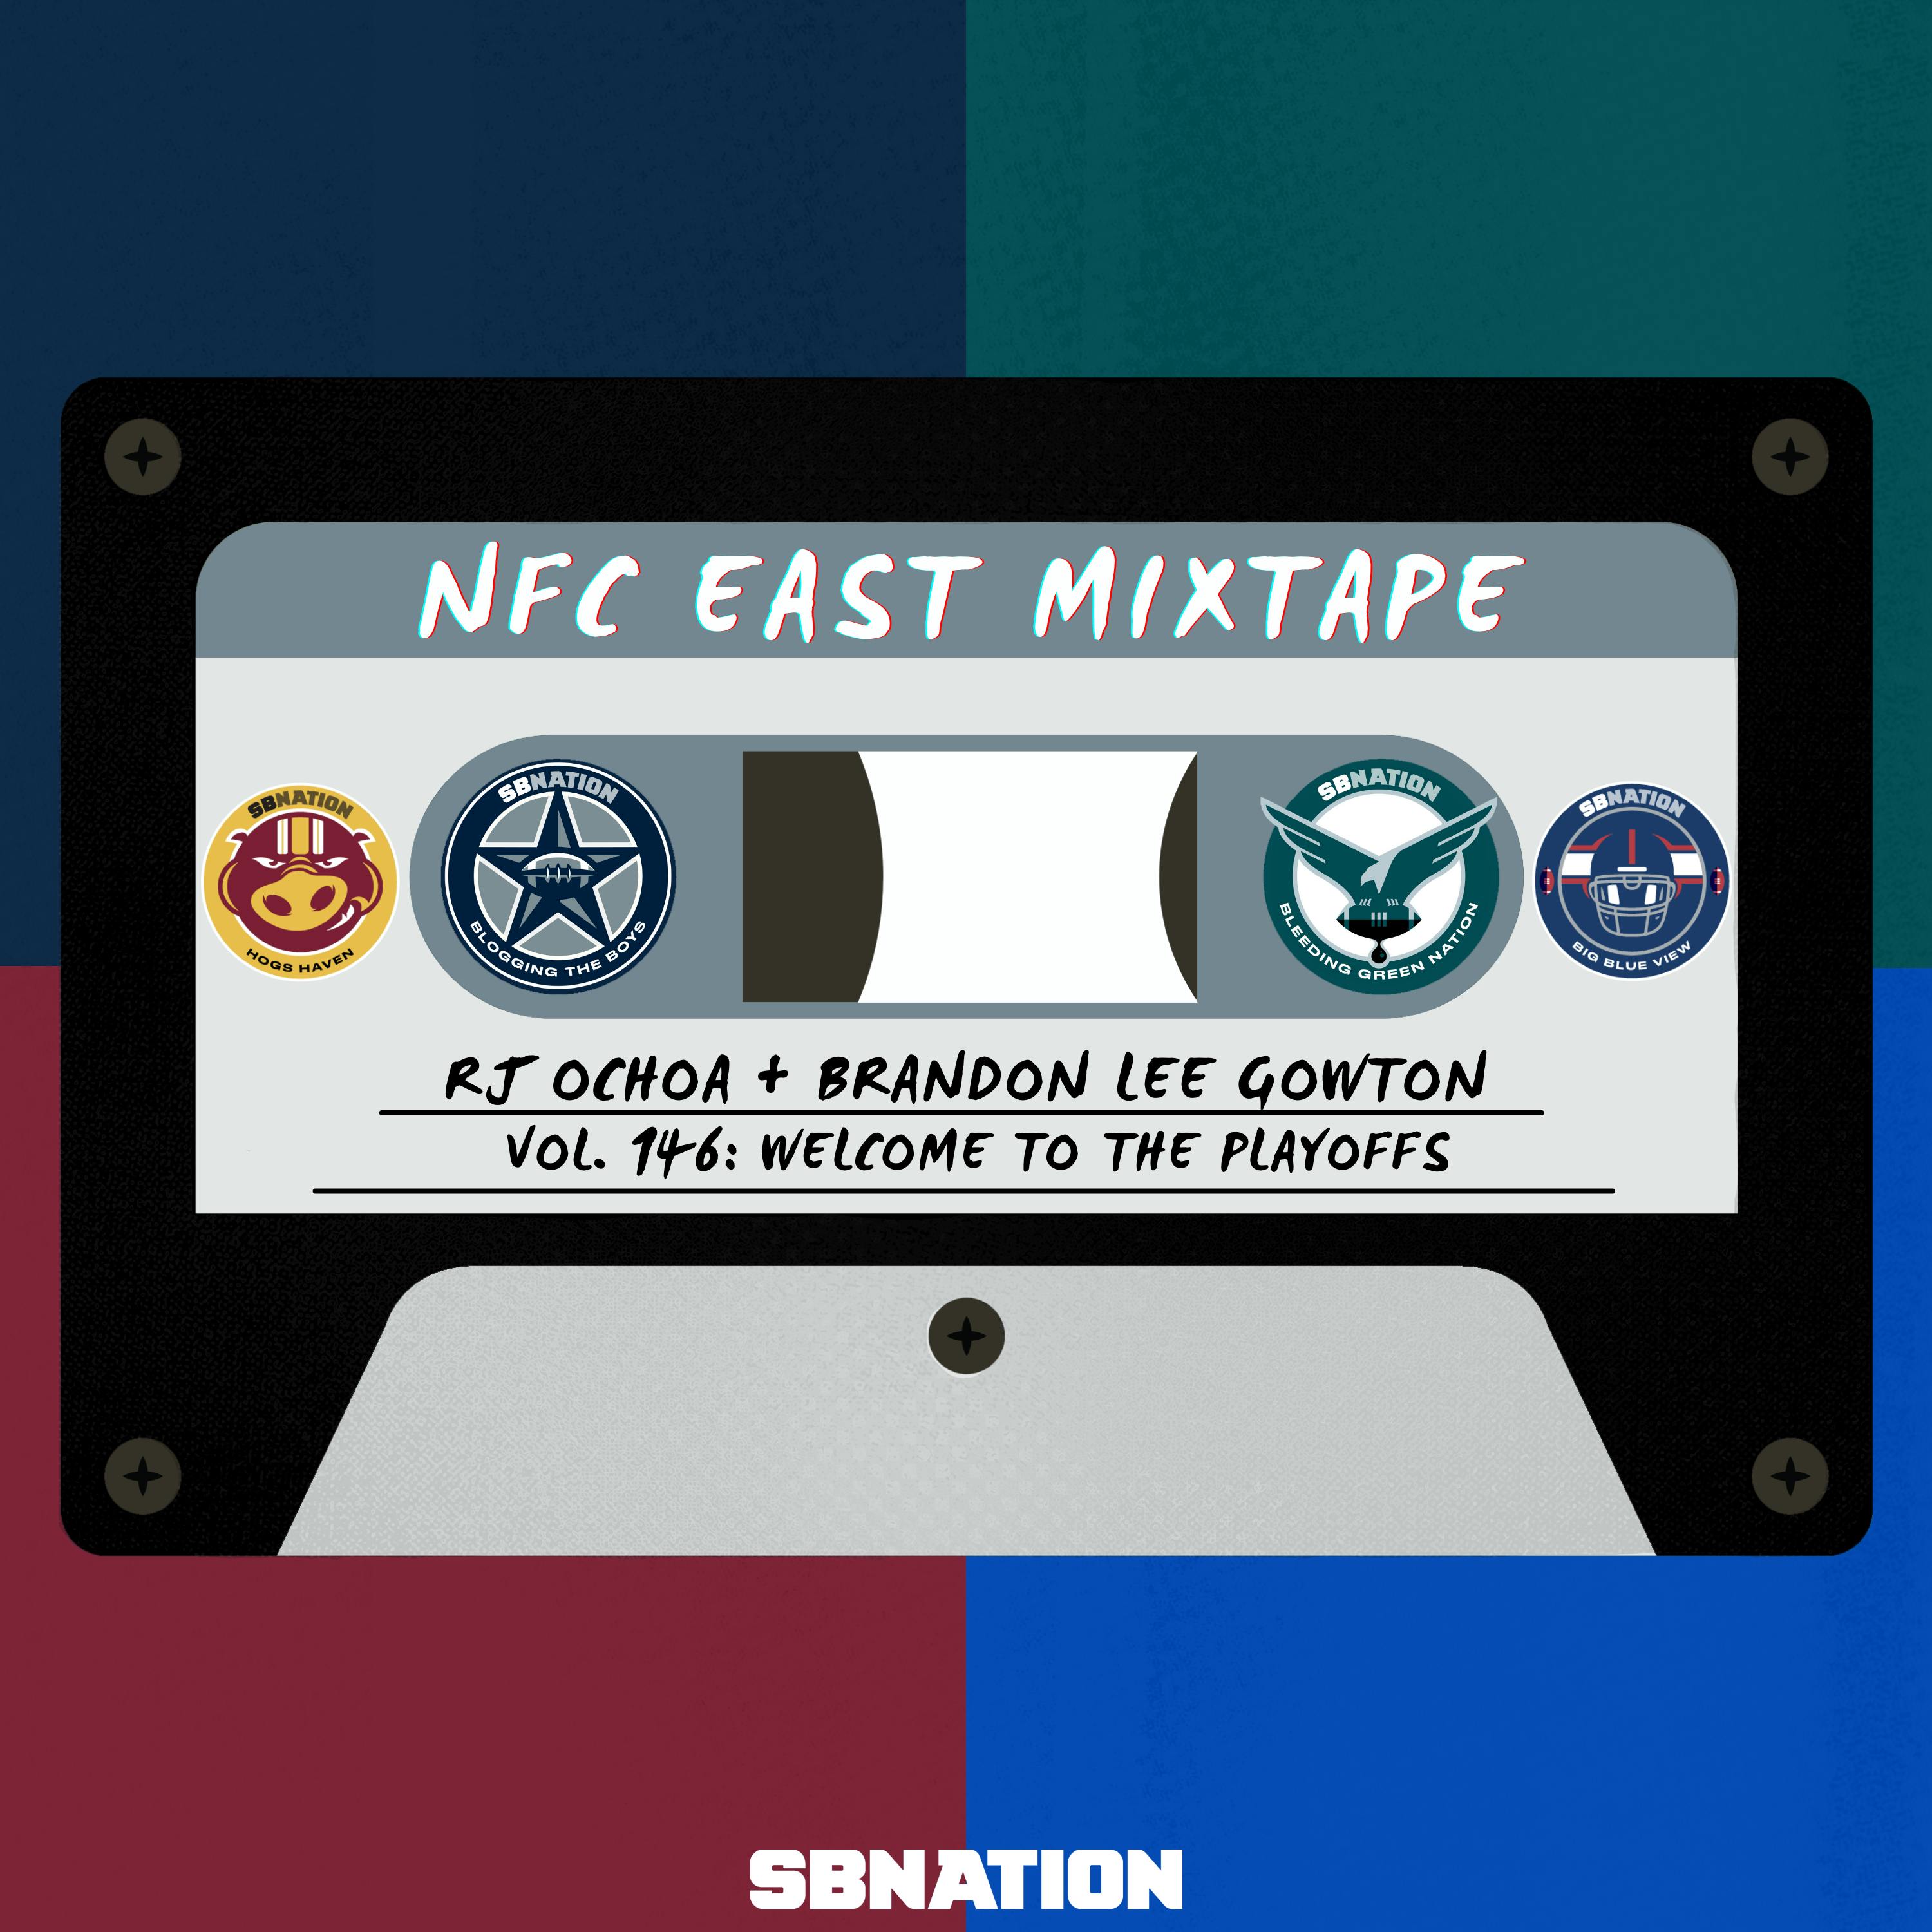 NFC East Mixtape Vol. 146: Welcome to the playoffs